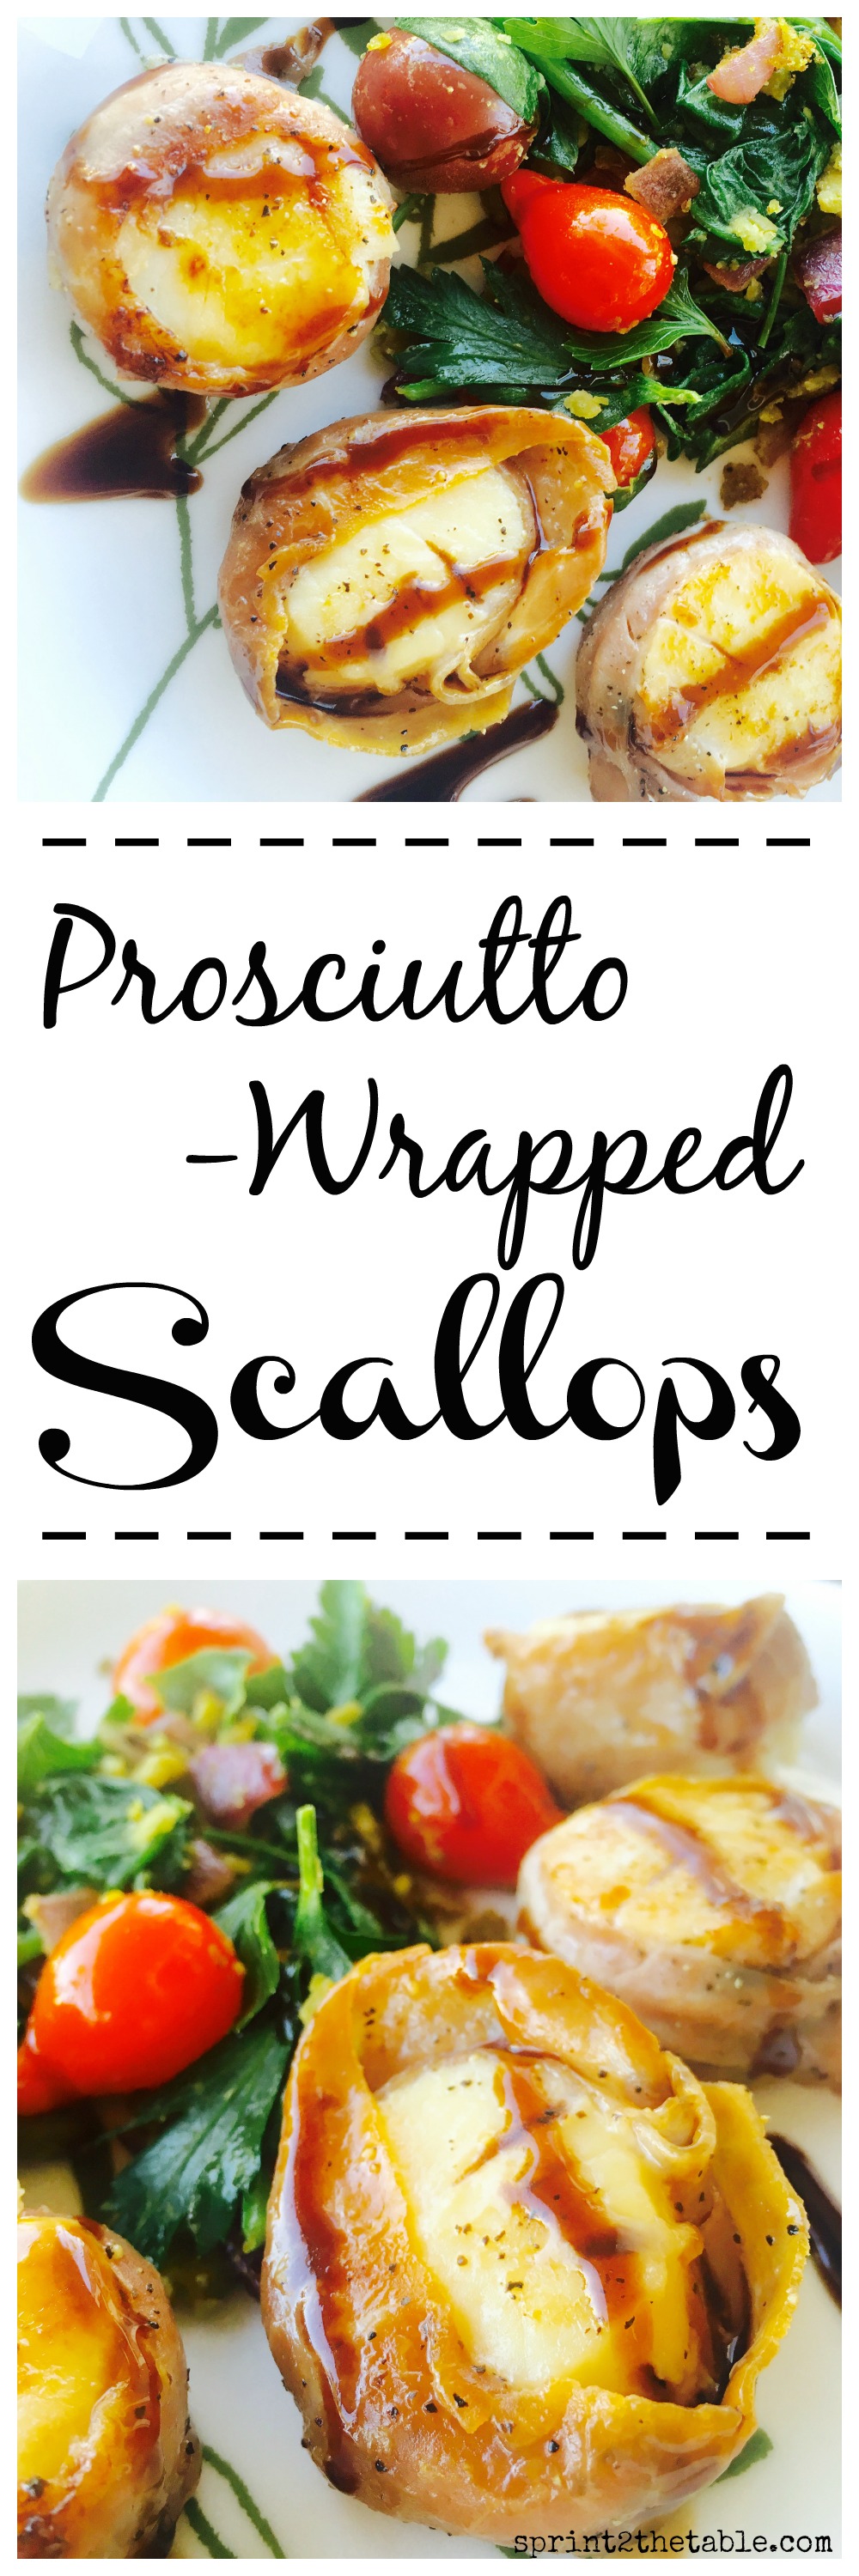 Easy Prosciutto-Wrapped Scallops with Balsamic - these fancy-looking scallops are actually quite easy and come together in minutes